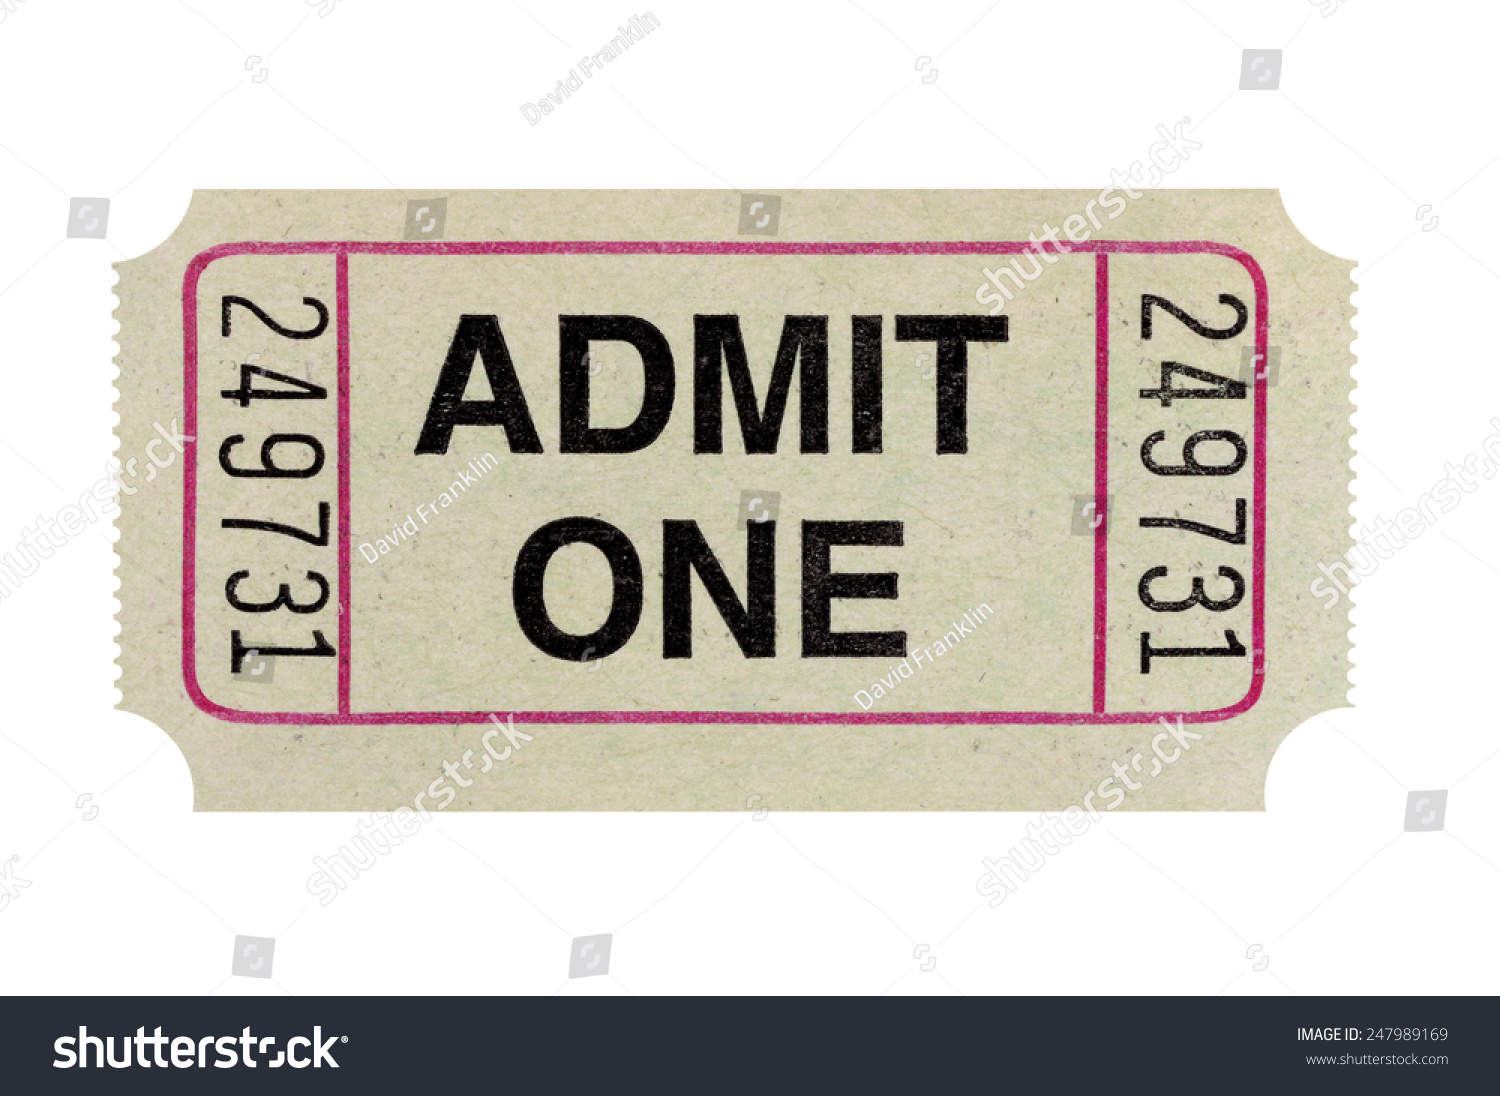 Admit one ticket isolated on white.   #247989169